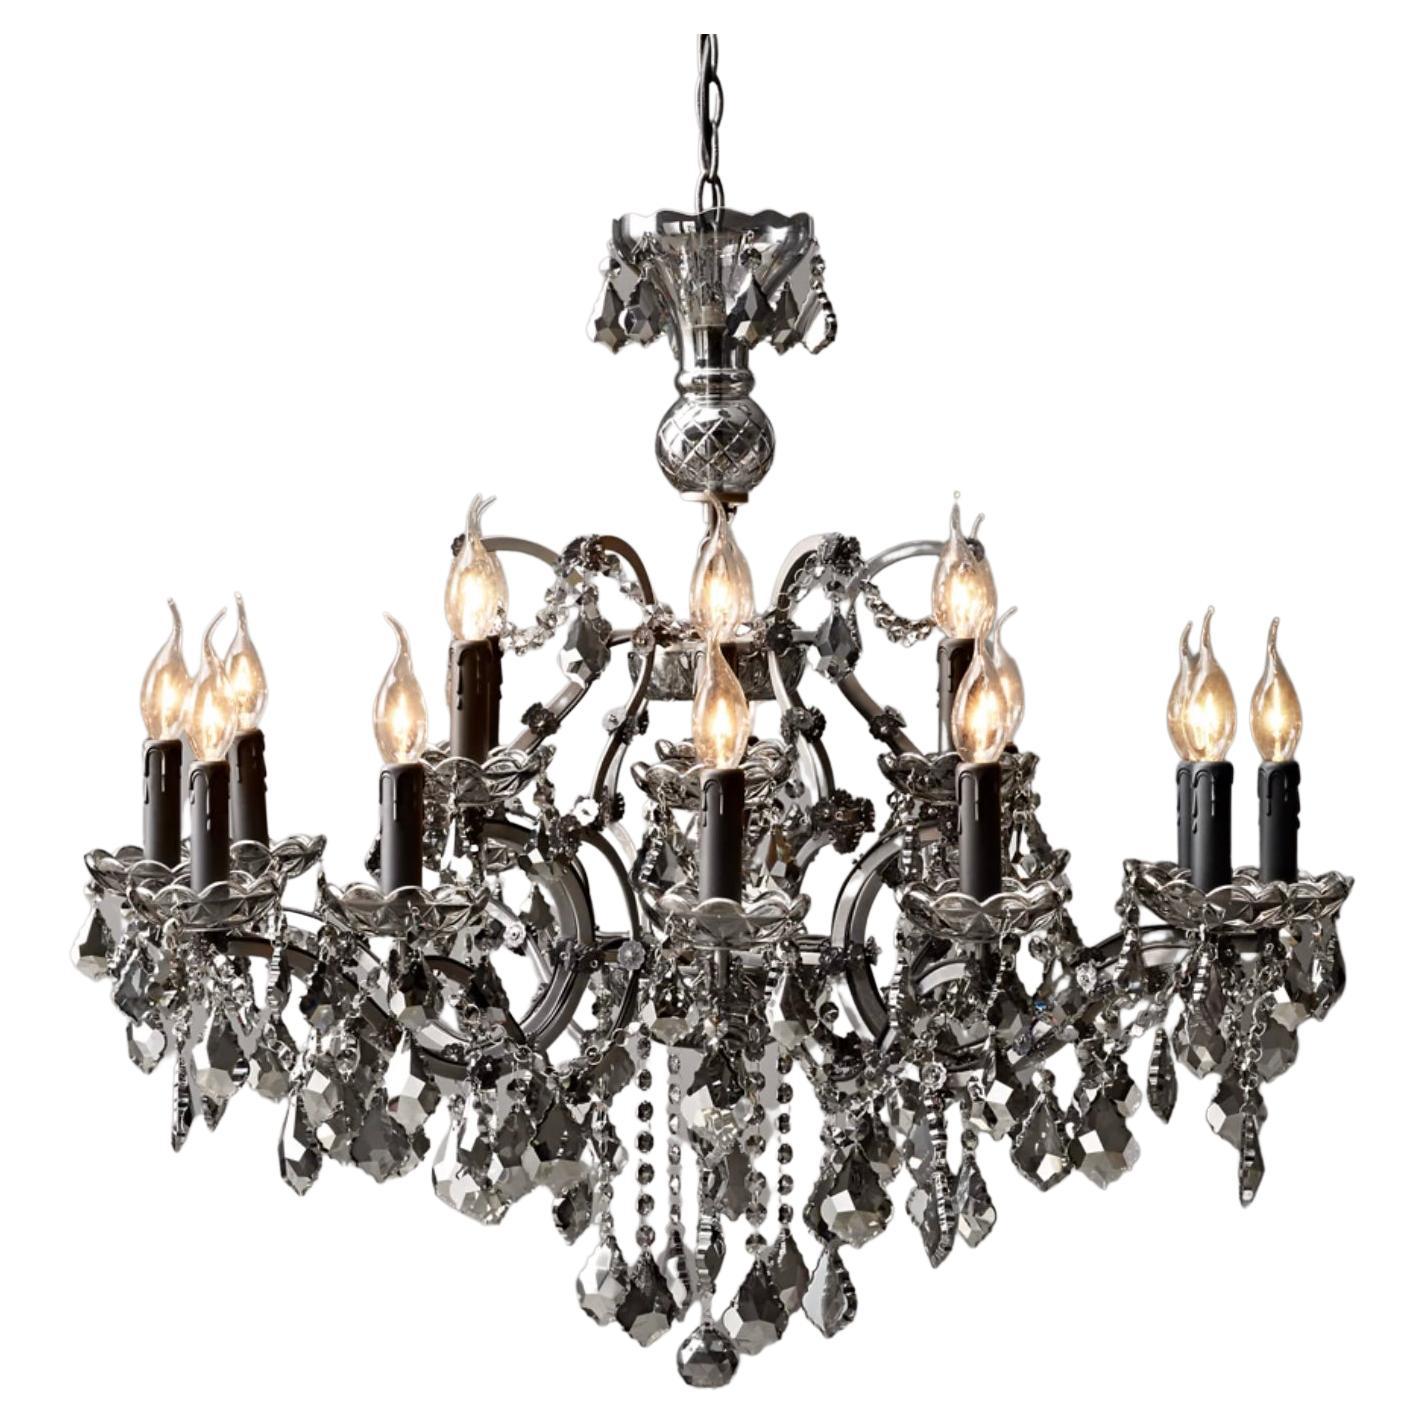 Single Beautiful 18-Light Crystal and Iron Rococo Style Chandelier